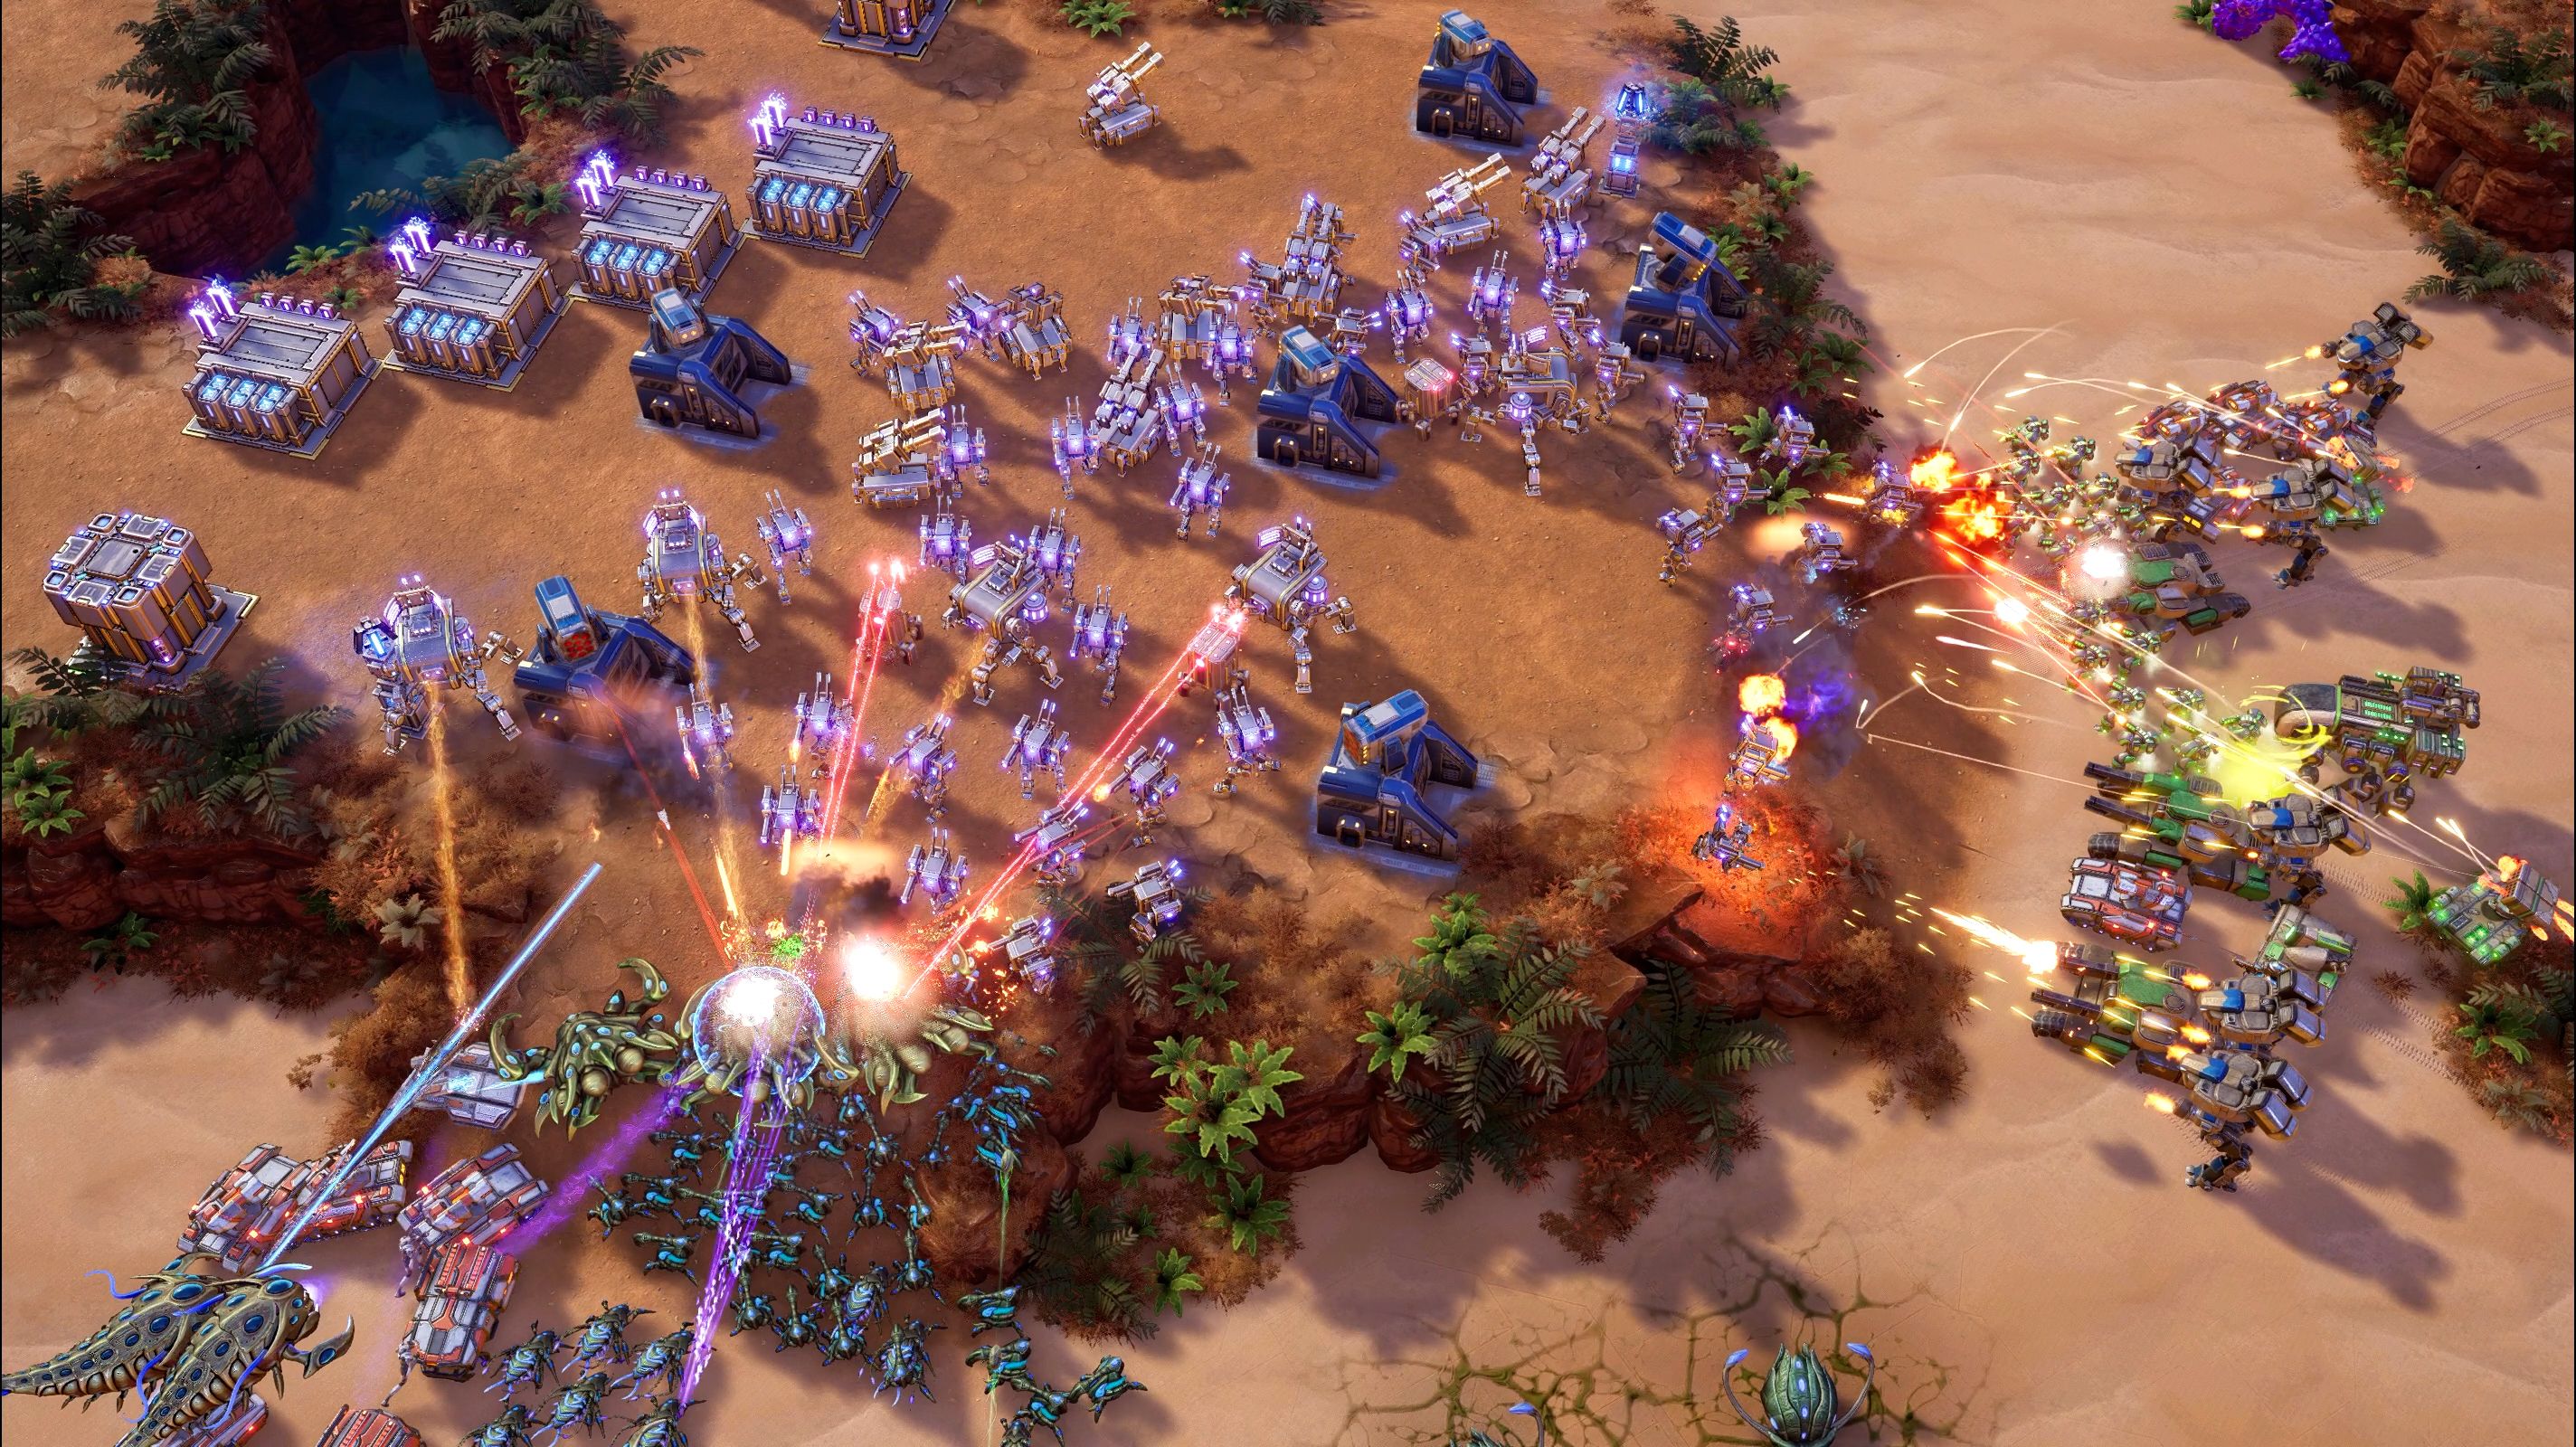 The new RTS from former StarCraft 2 devs looks a lot like StarCraft 2